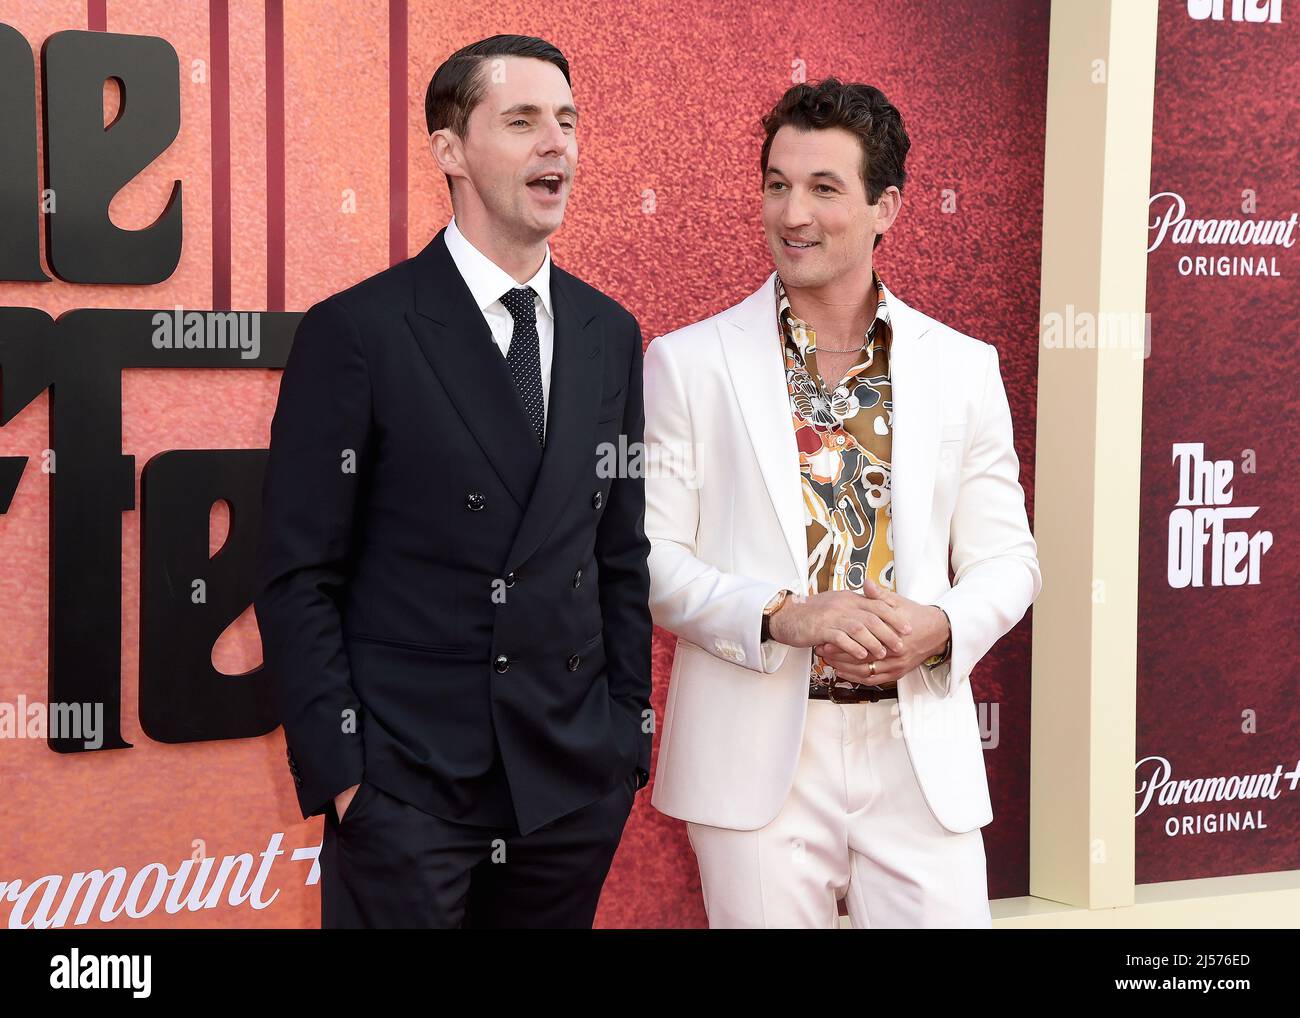 Los Angeles, USA. 20th Apr, 2022. Matthew Goode and Miles Teller walking on  the red carpet at the Los Angeles Premiere of Season One of Paramount  Series "The Offer" at the Paramount